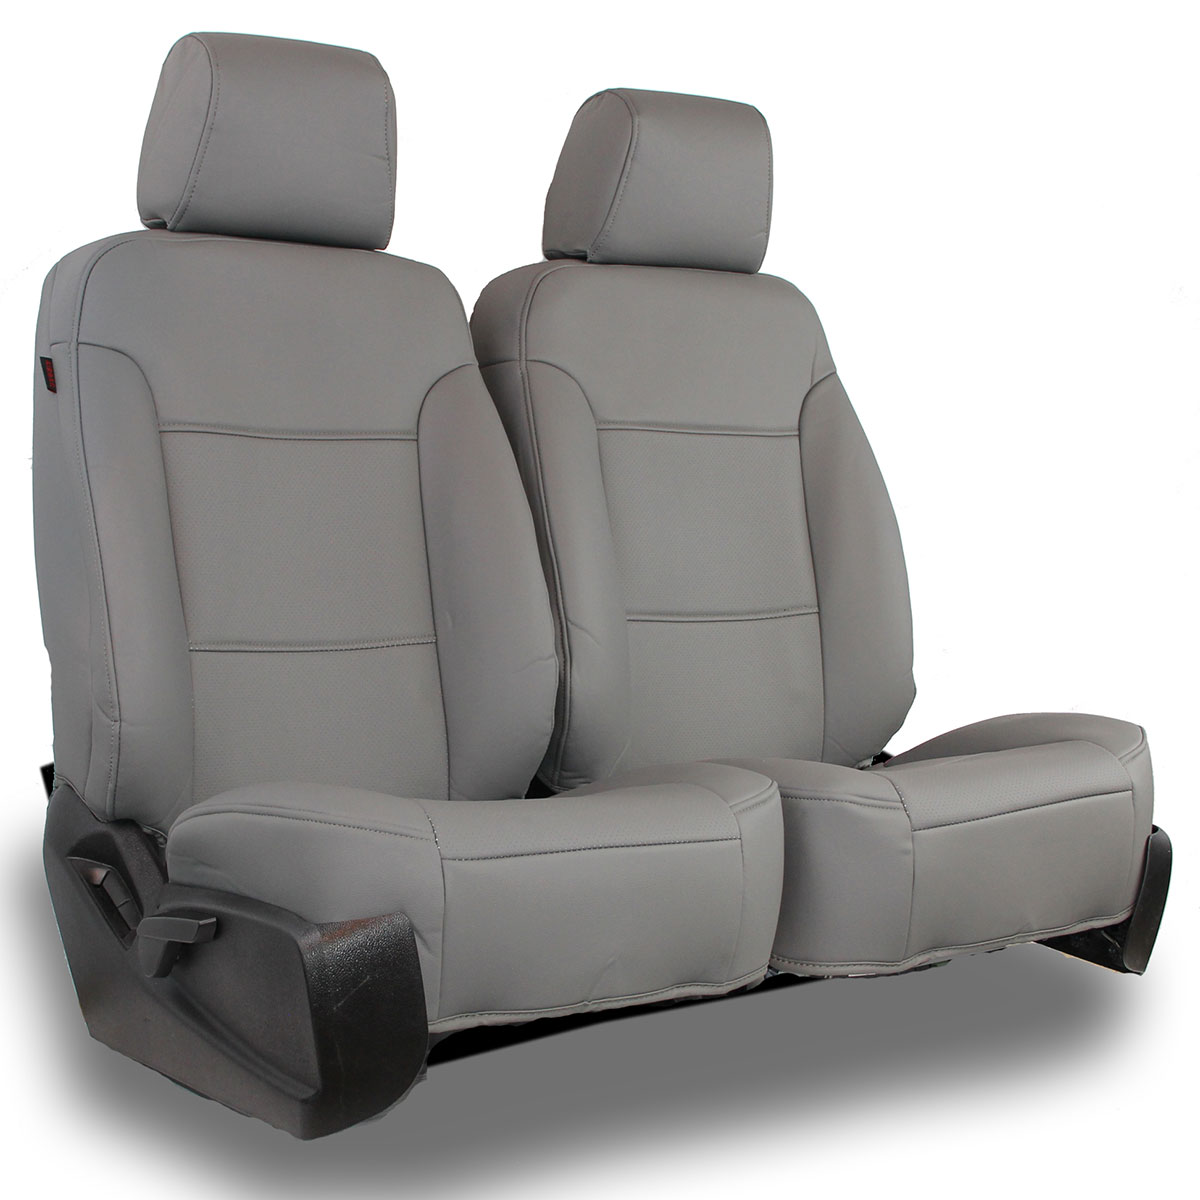 Coverking Synthetic Leather Front Seat Covers for Dodge Ram in Leatherette 